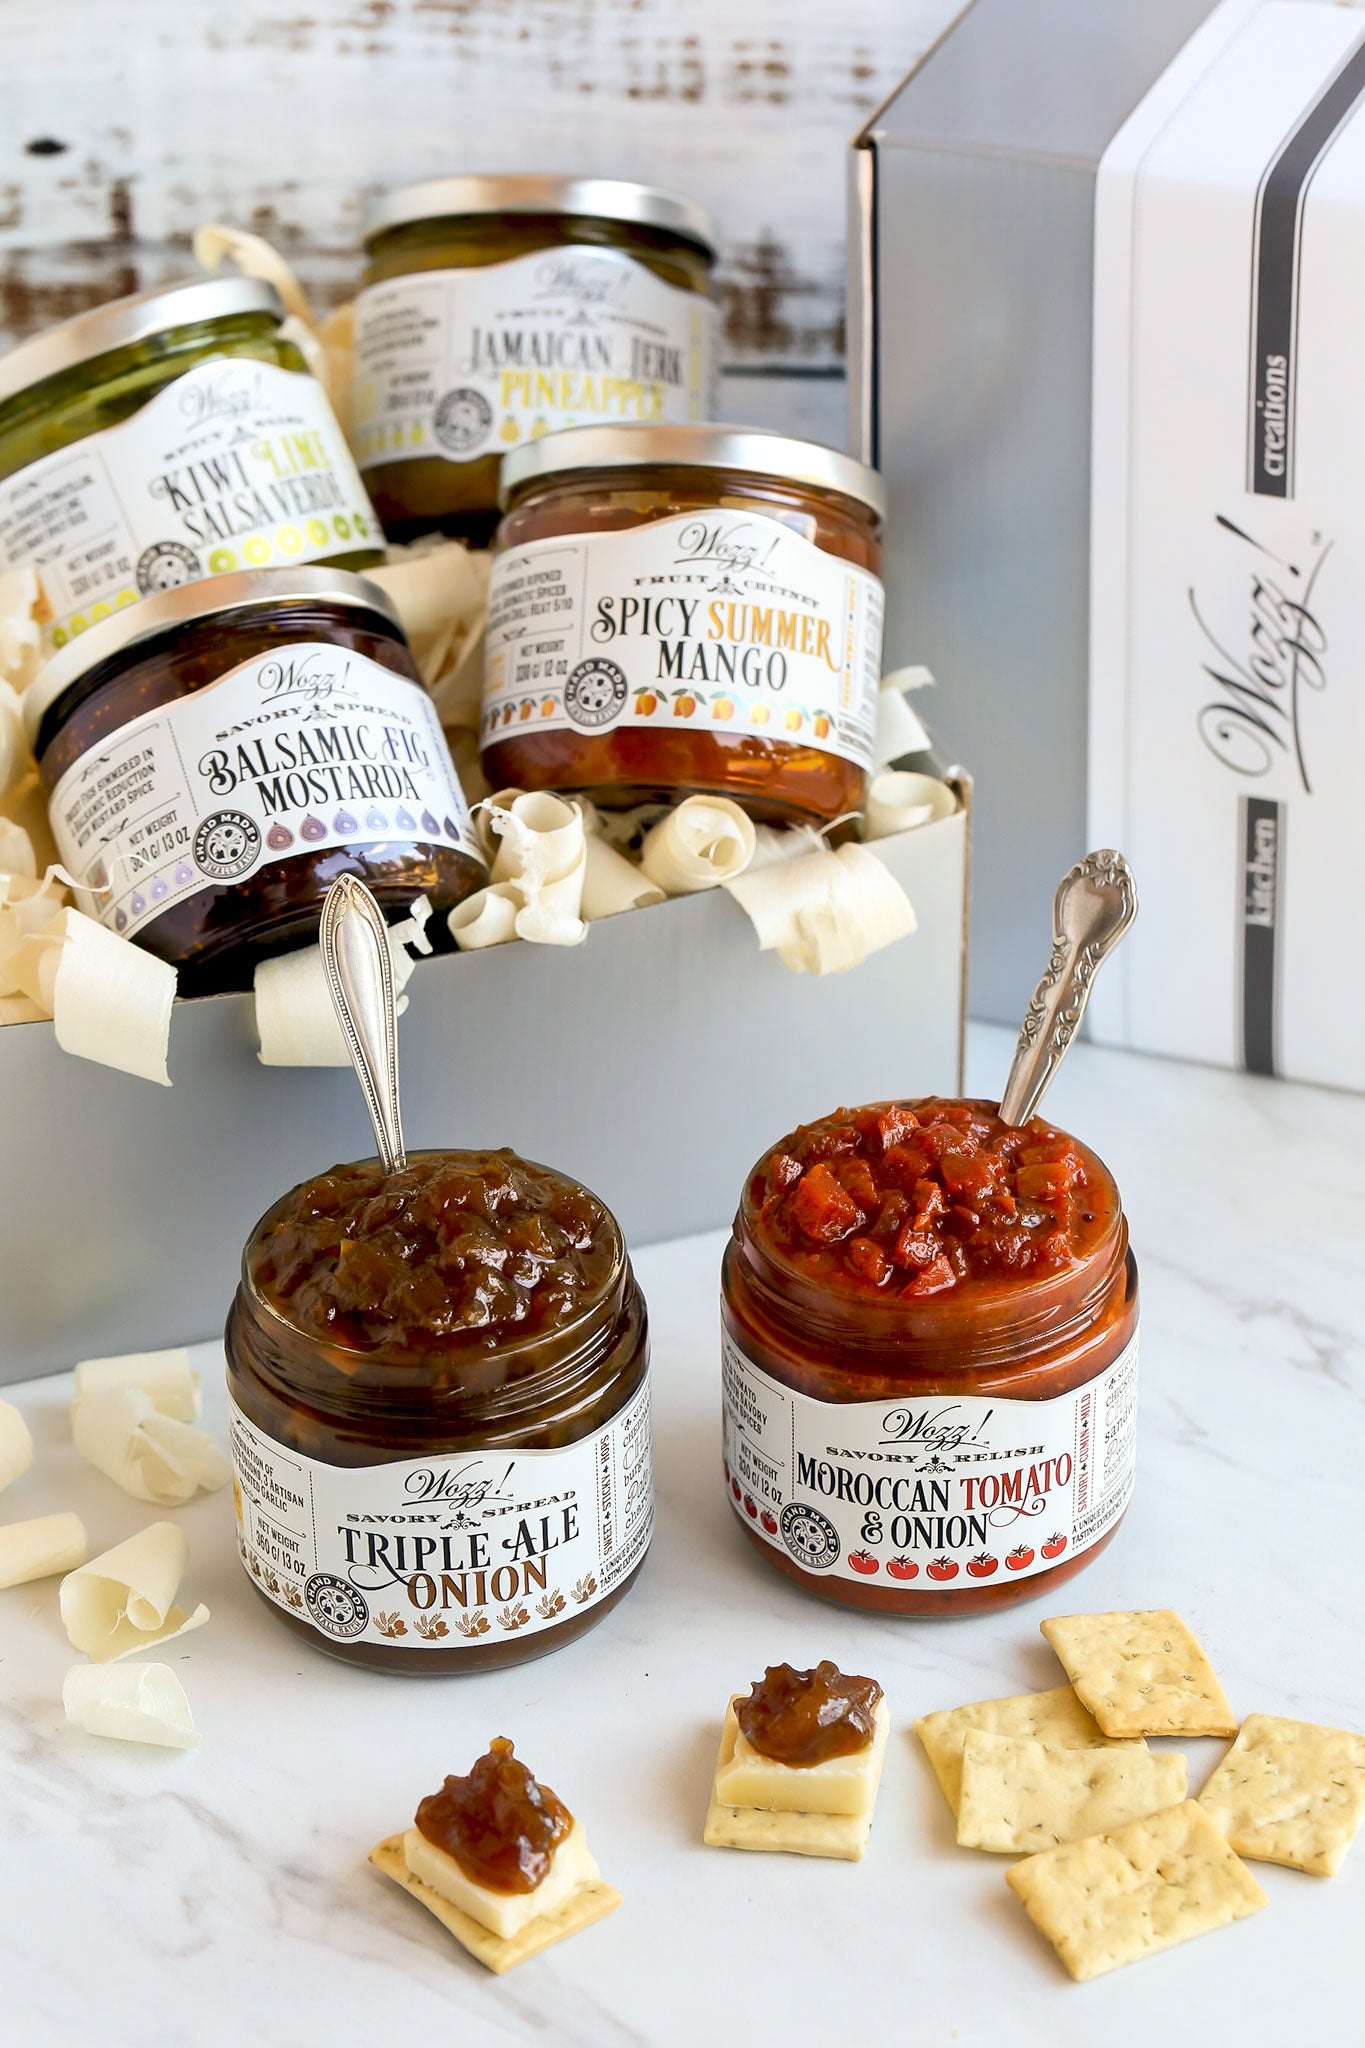 Condiment Lovers Gourmet Gift Box | Food Gifts | Wozz! Kitchen Creations